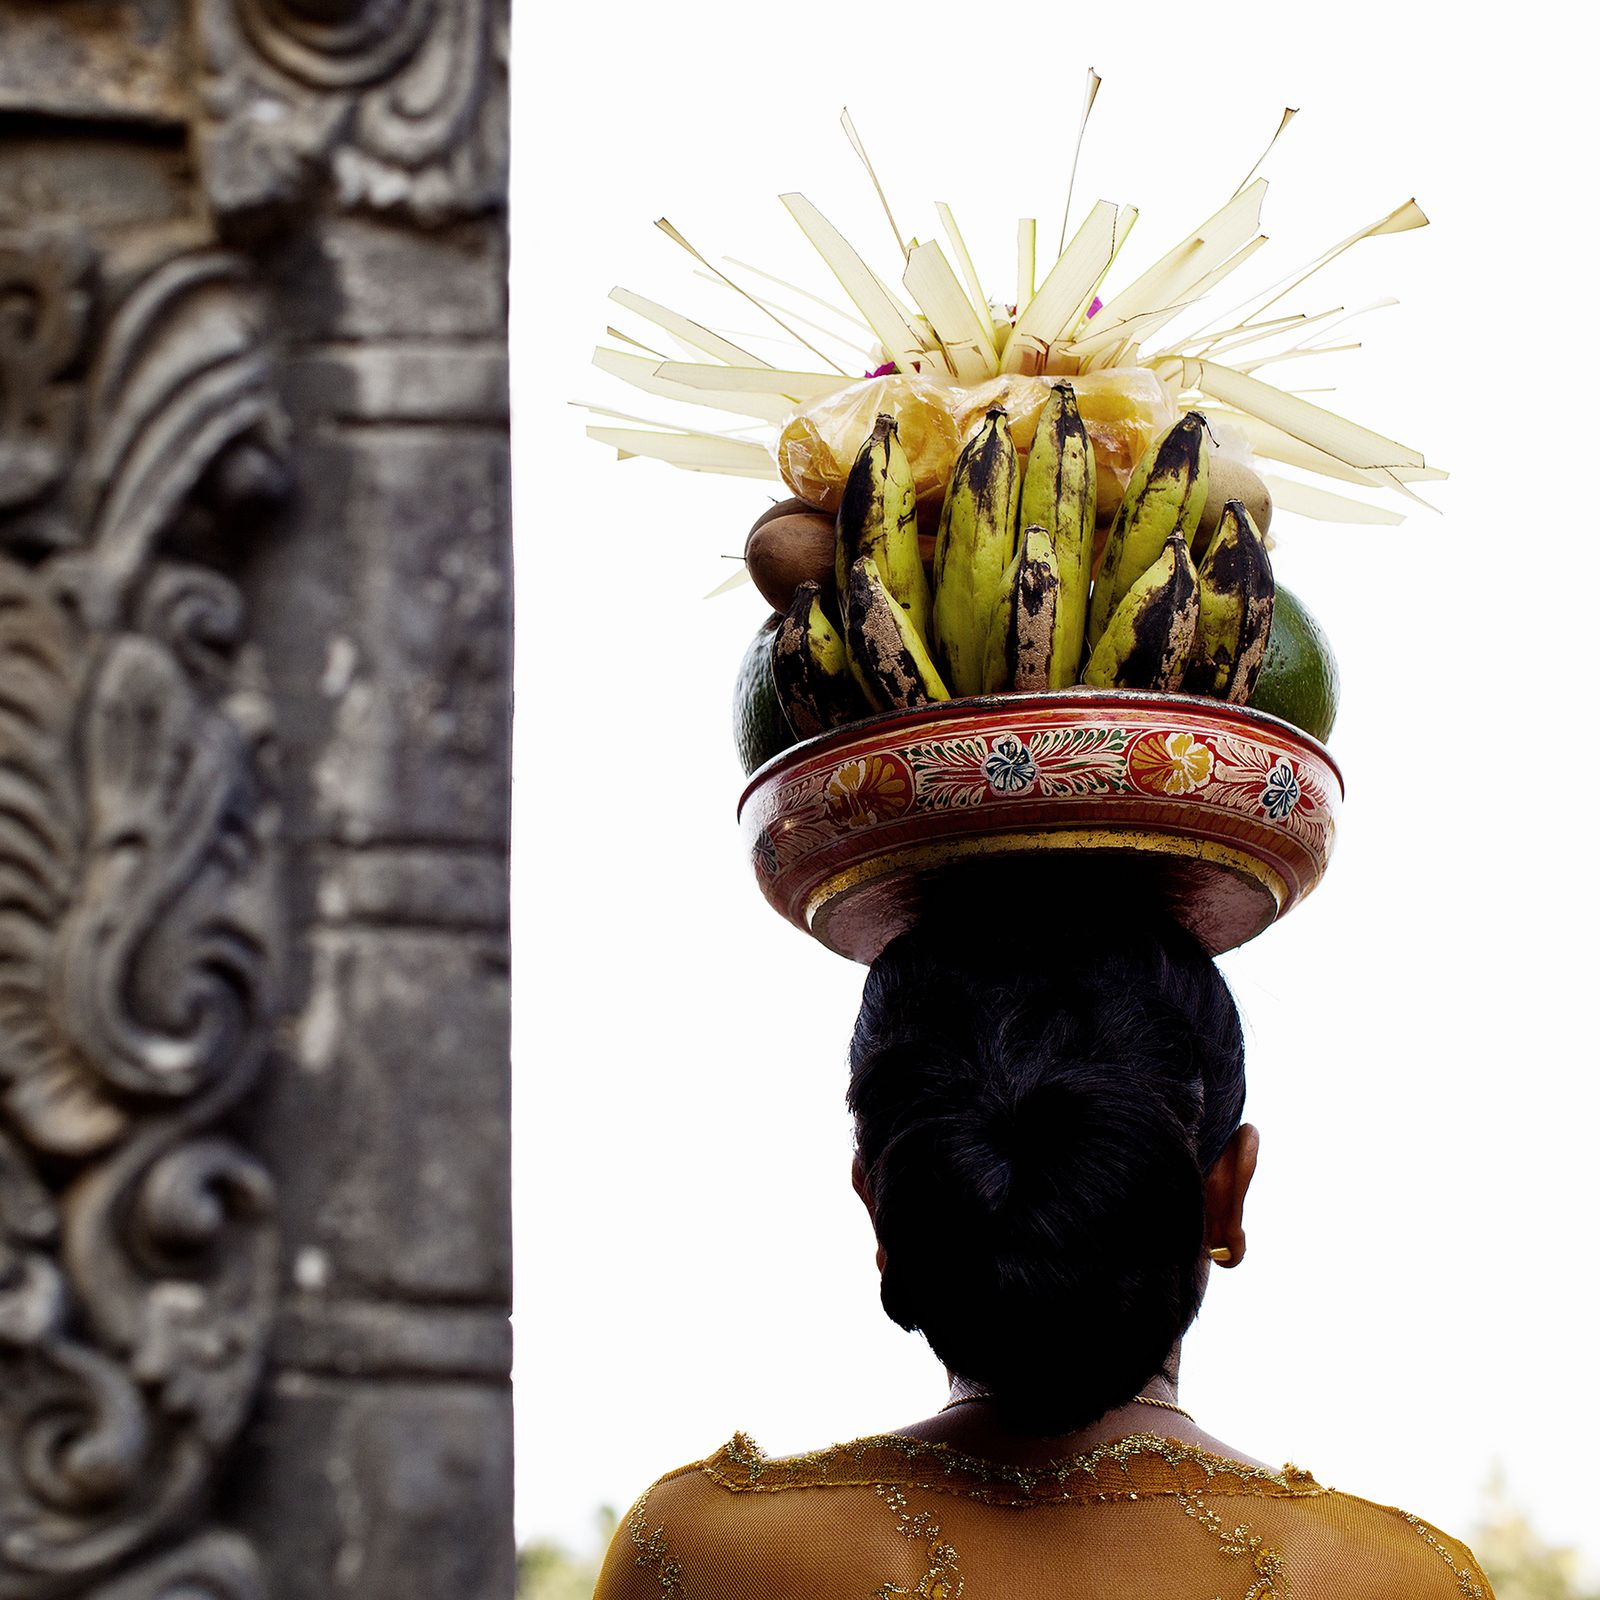 © bruna rotunno - Image from the Women in Bali photography project